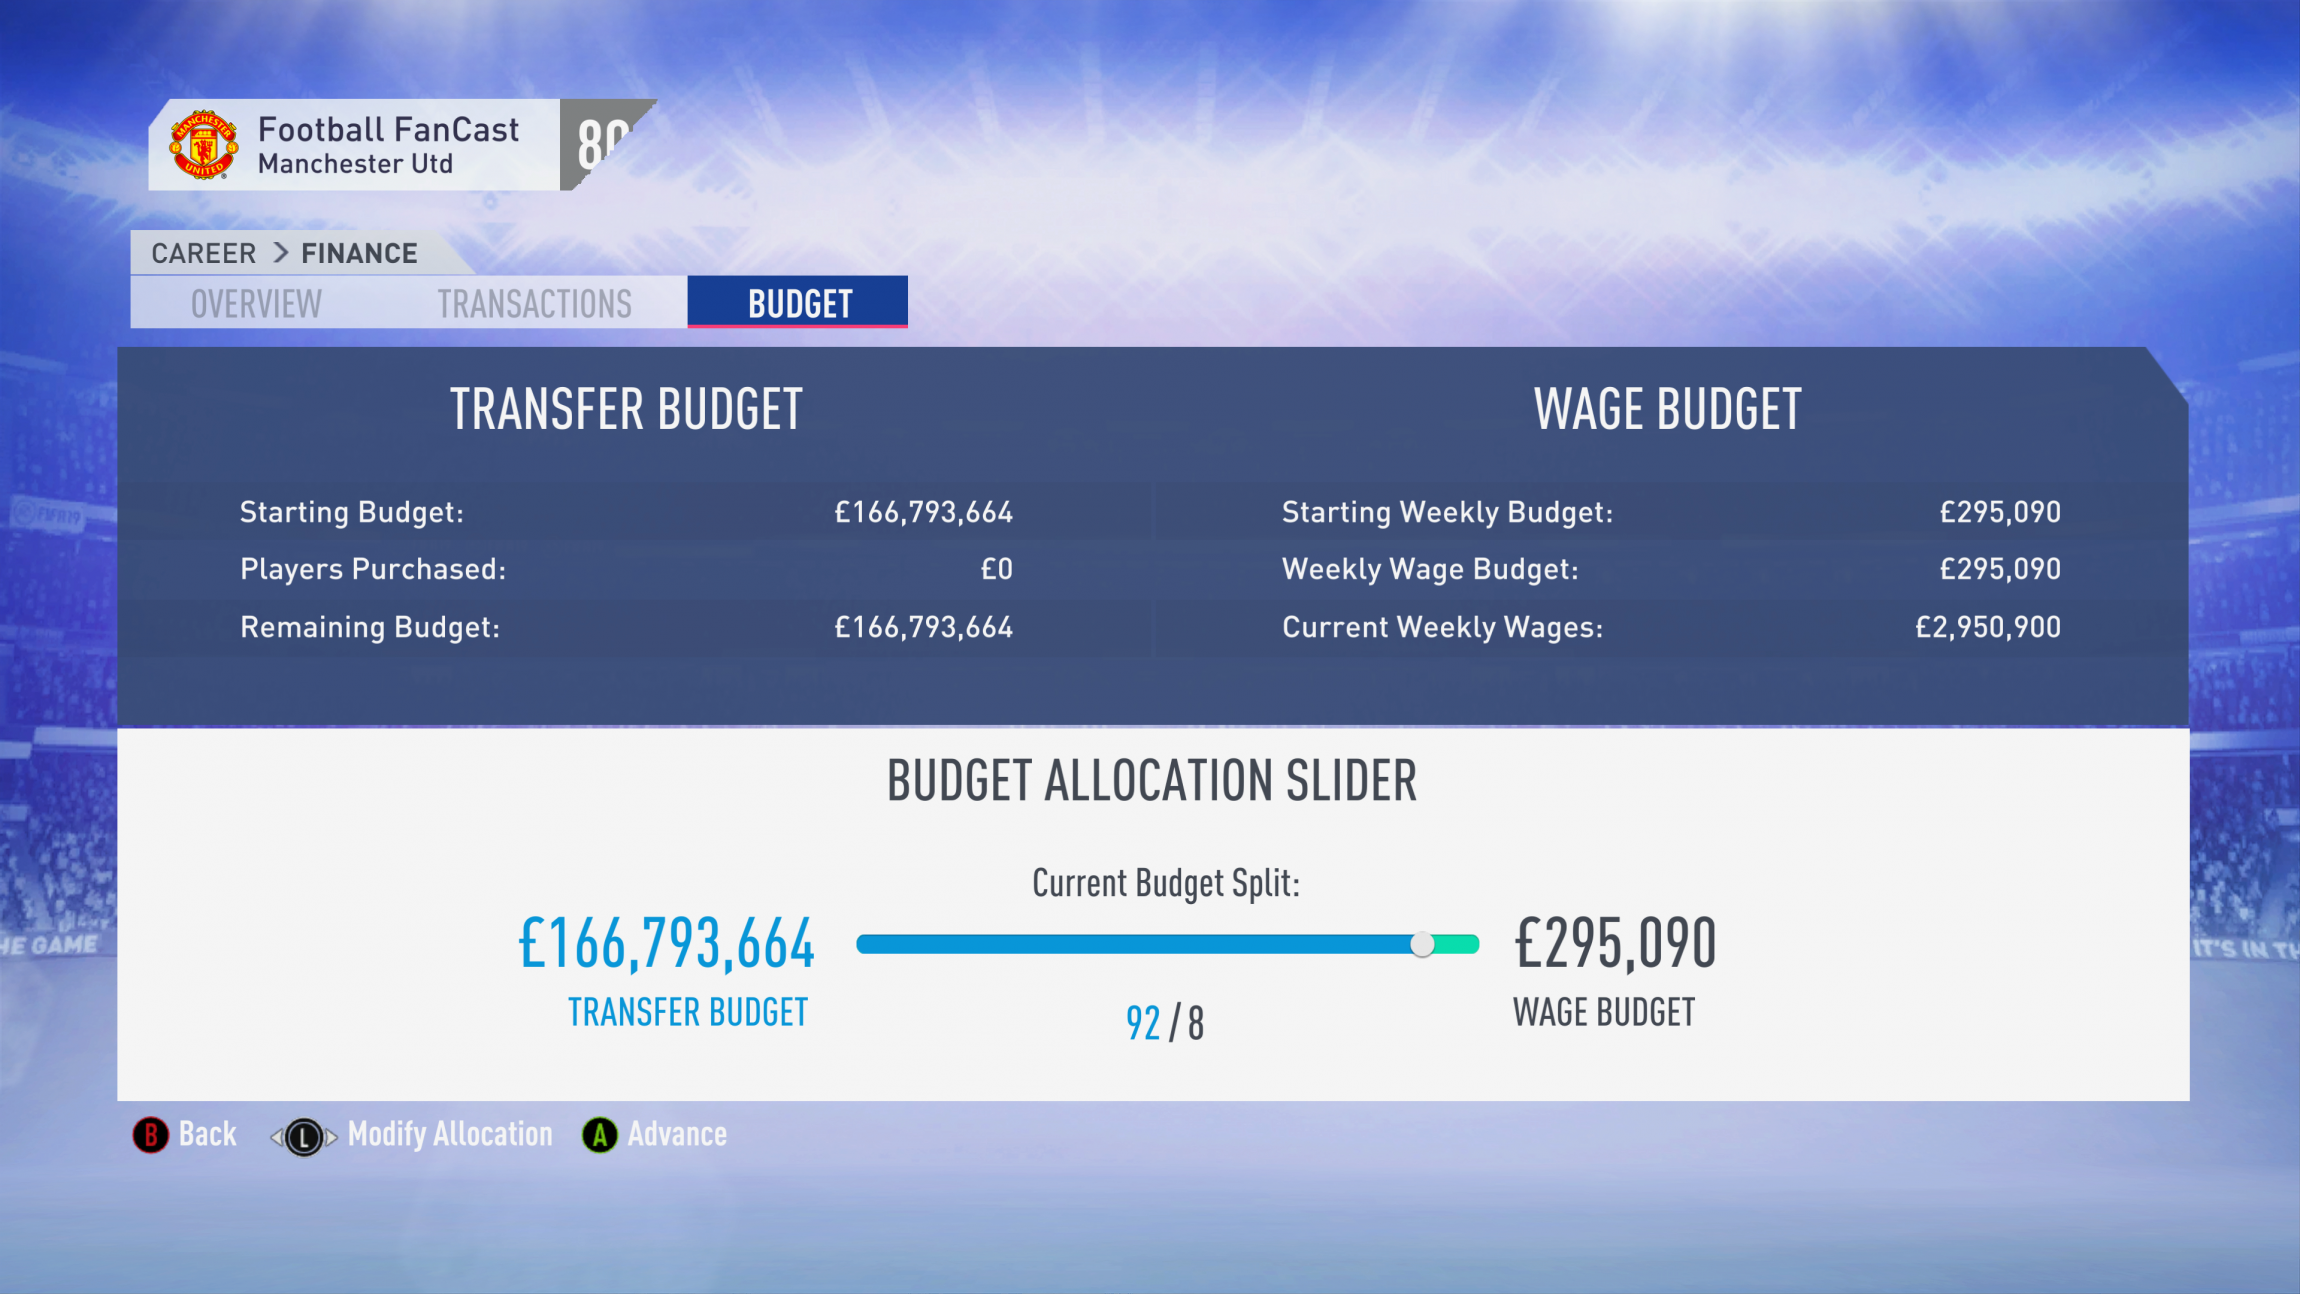 FIFA 19 Career Mode - Manchester United budget